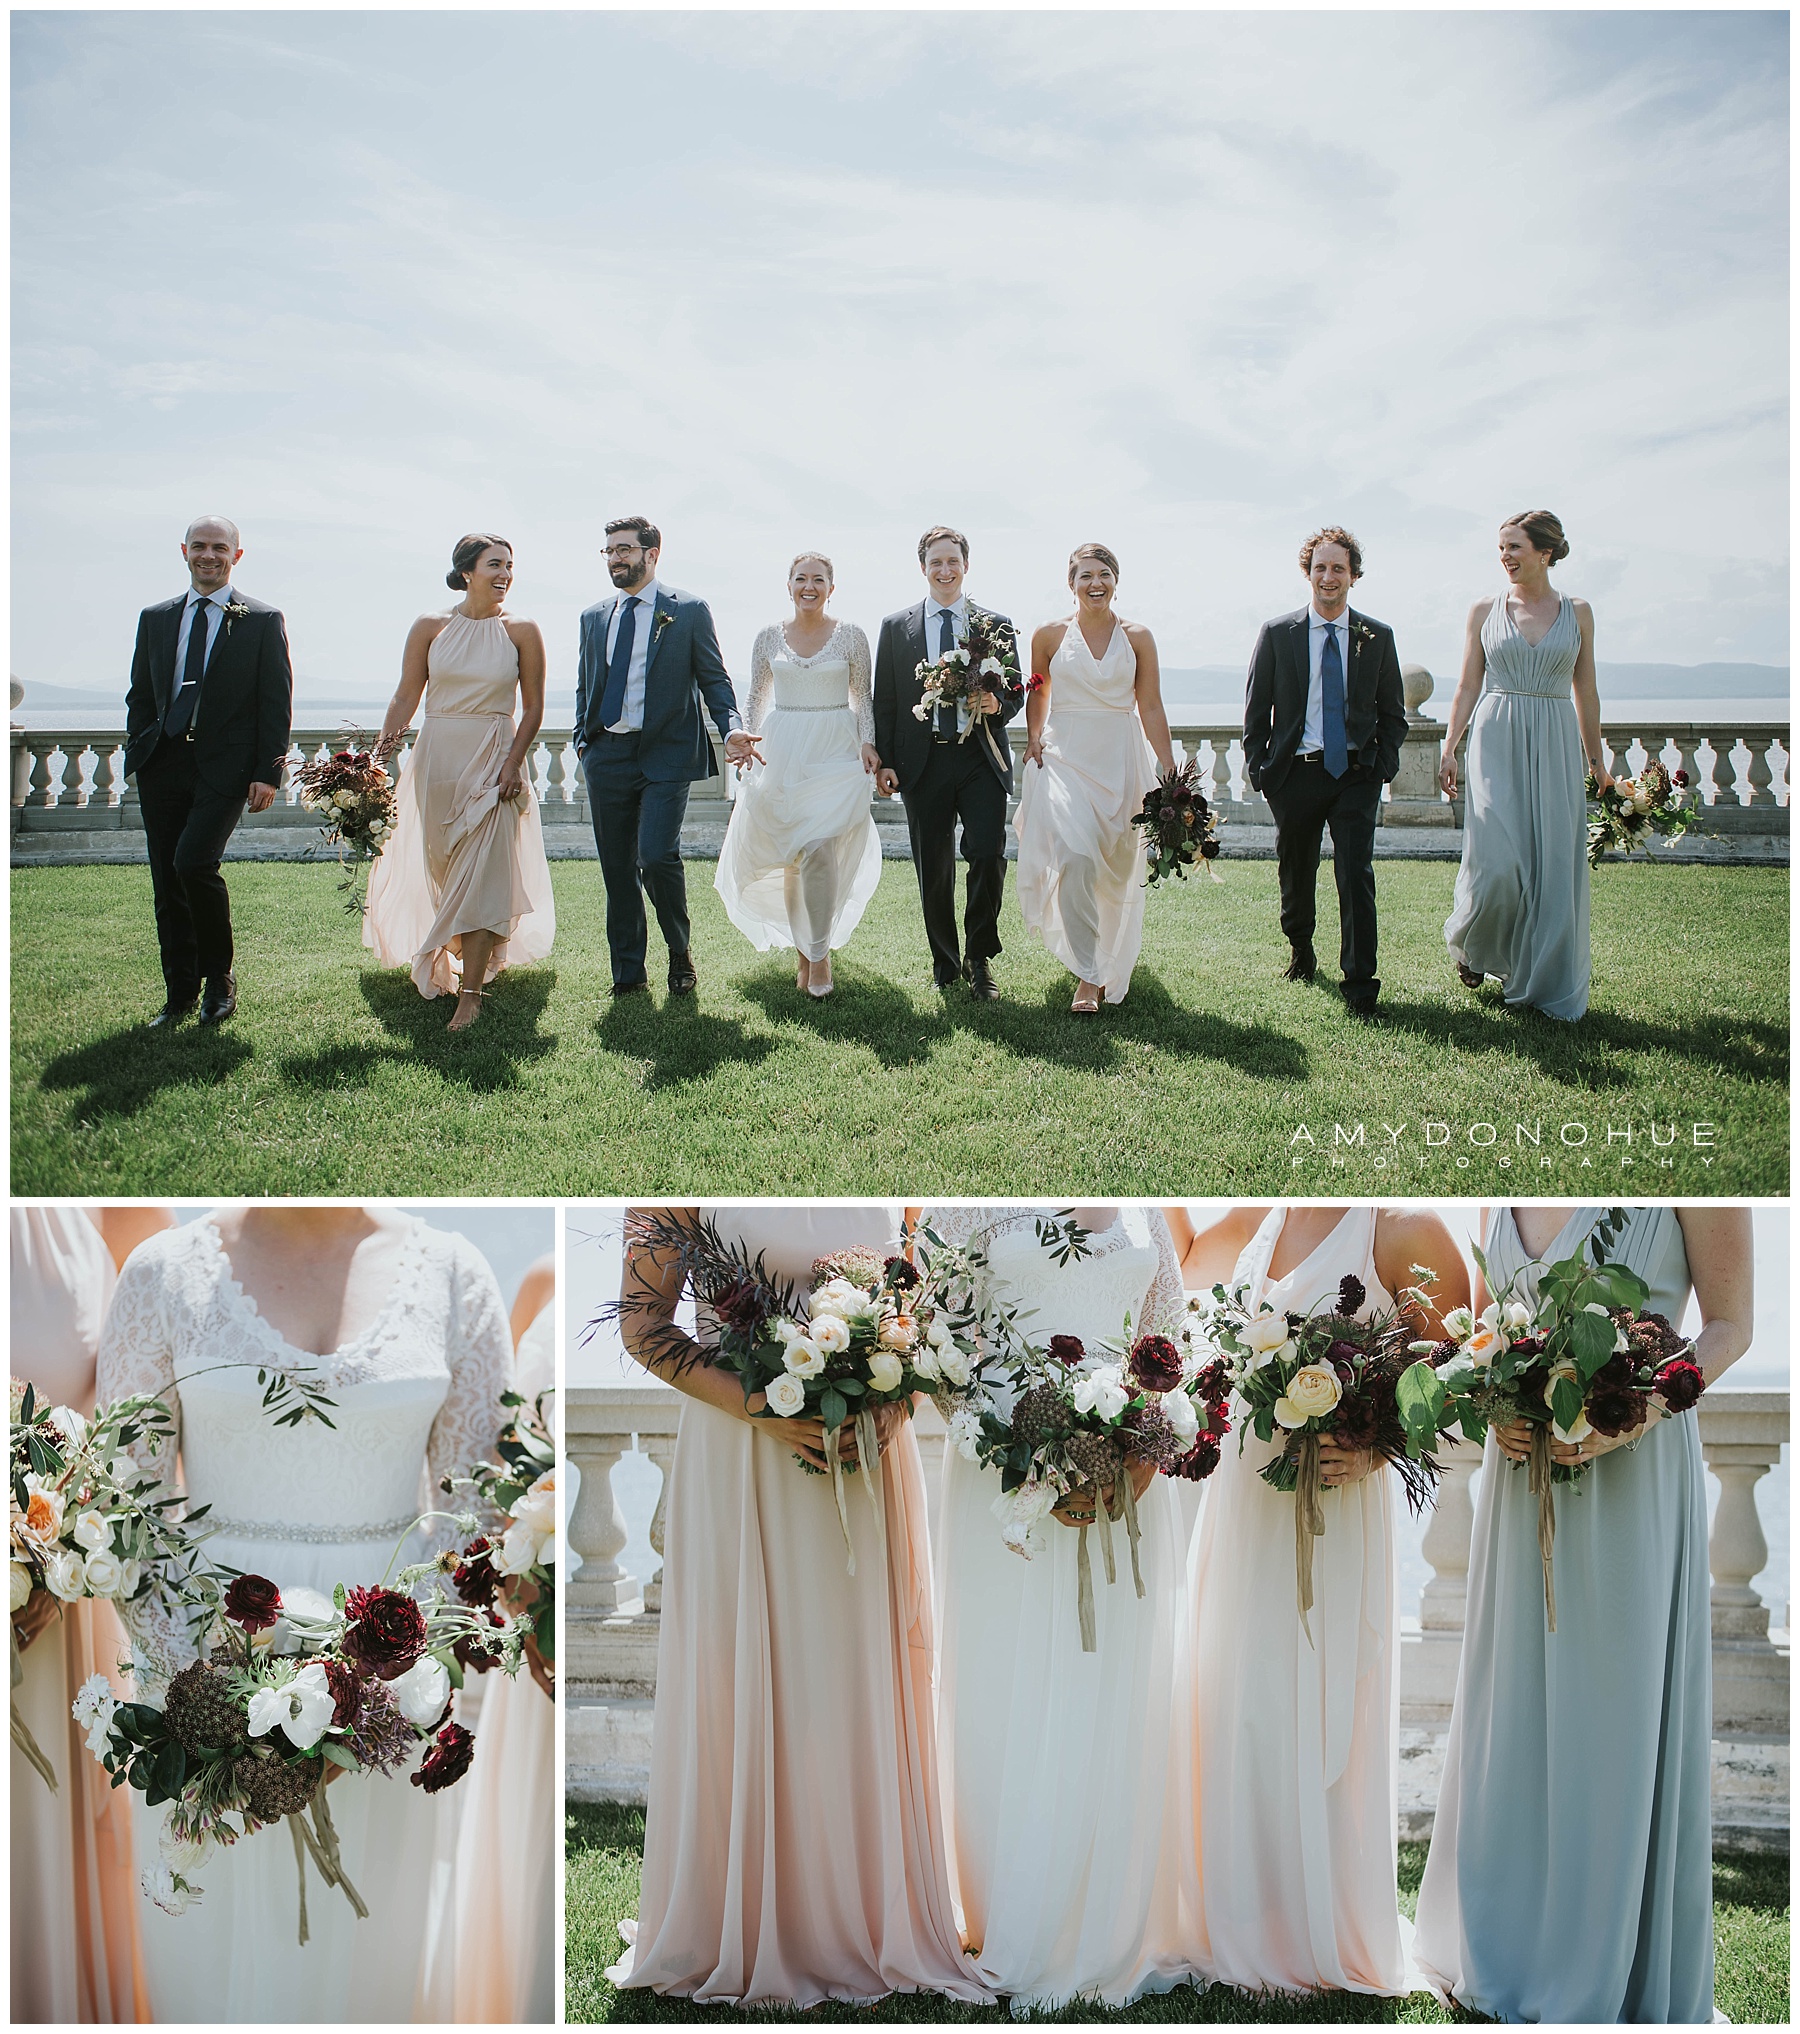 Bridal party portraits at Shelburne Farms | Photography by Amy Donohue Photography